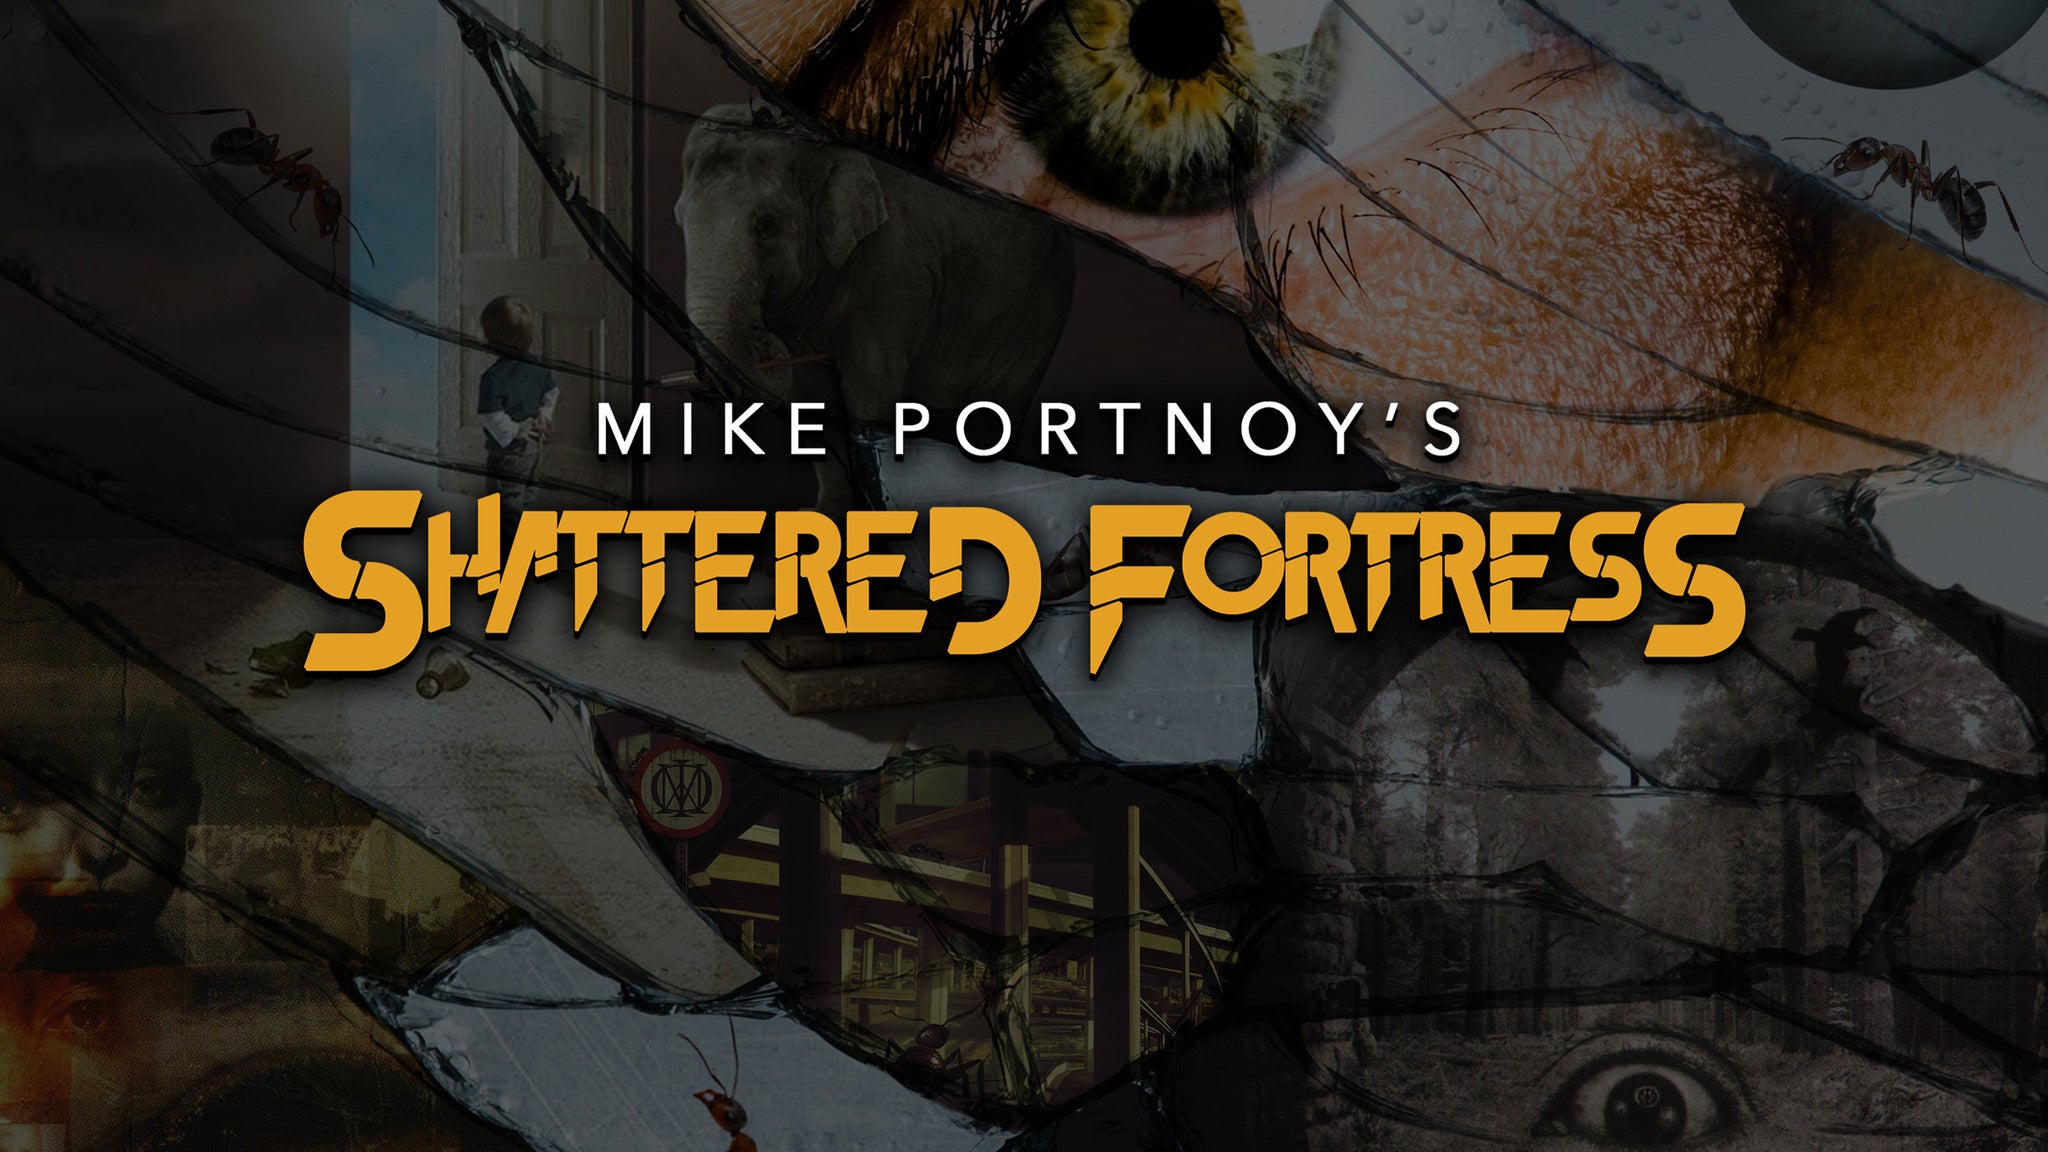 Mike Portnoy's Shattered Fortress playing Dream Theaters 12 Step Suite in New York promo photo for Citi® Cardmember Preferred presale offer code